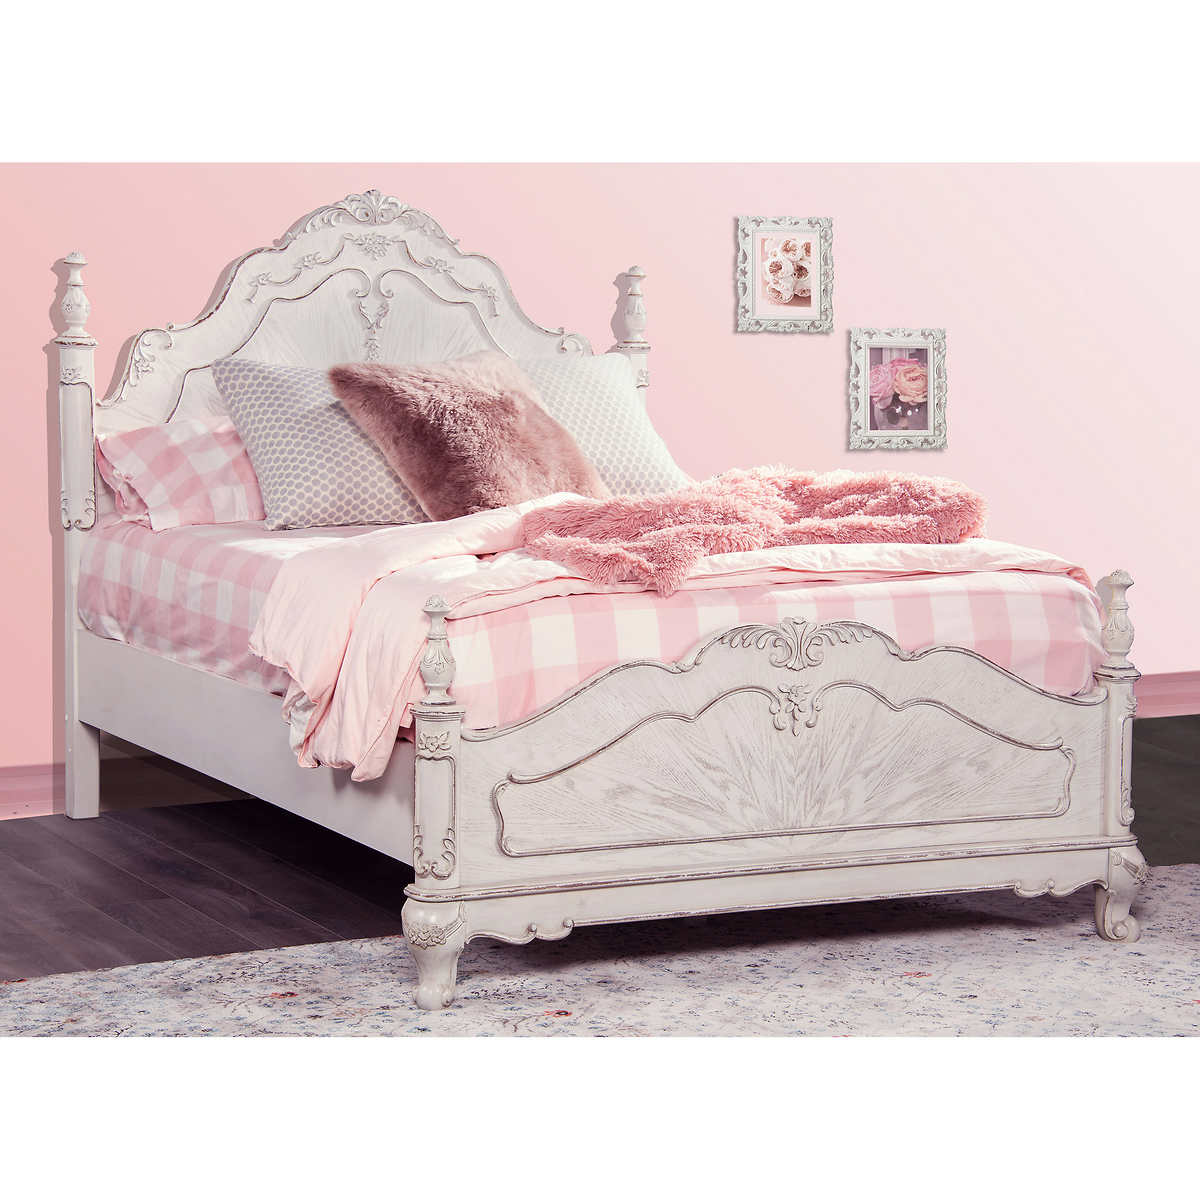 Princess Ii Double Bed Costco, Princess Double Bed Frame